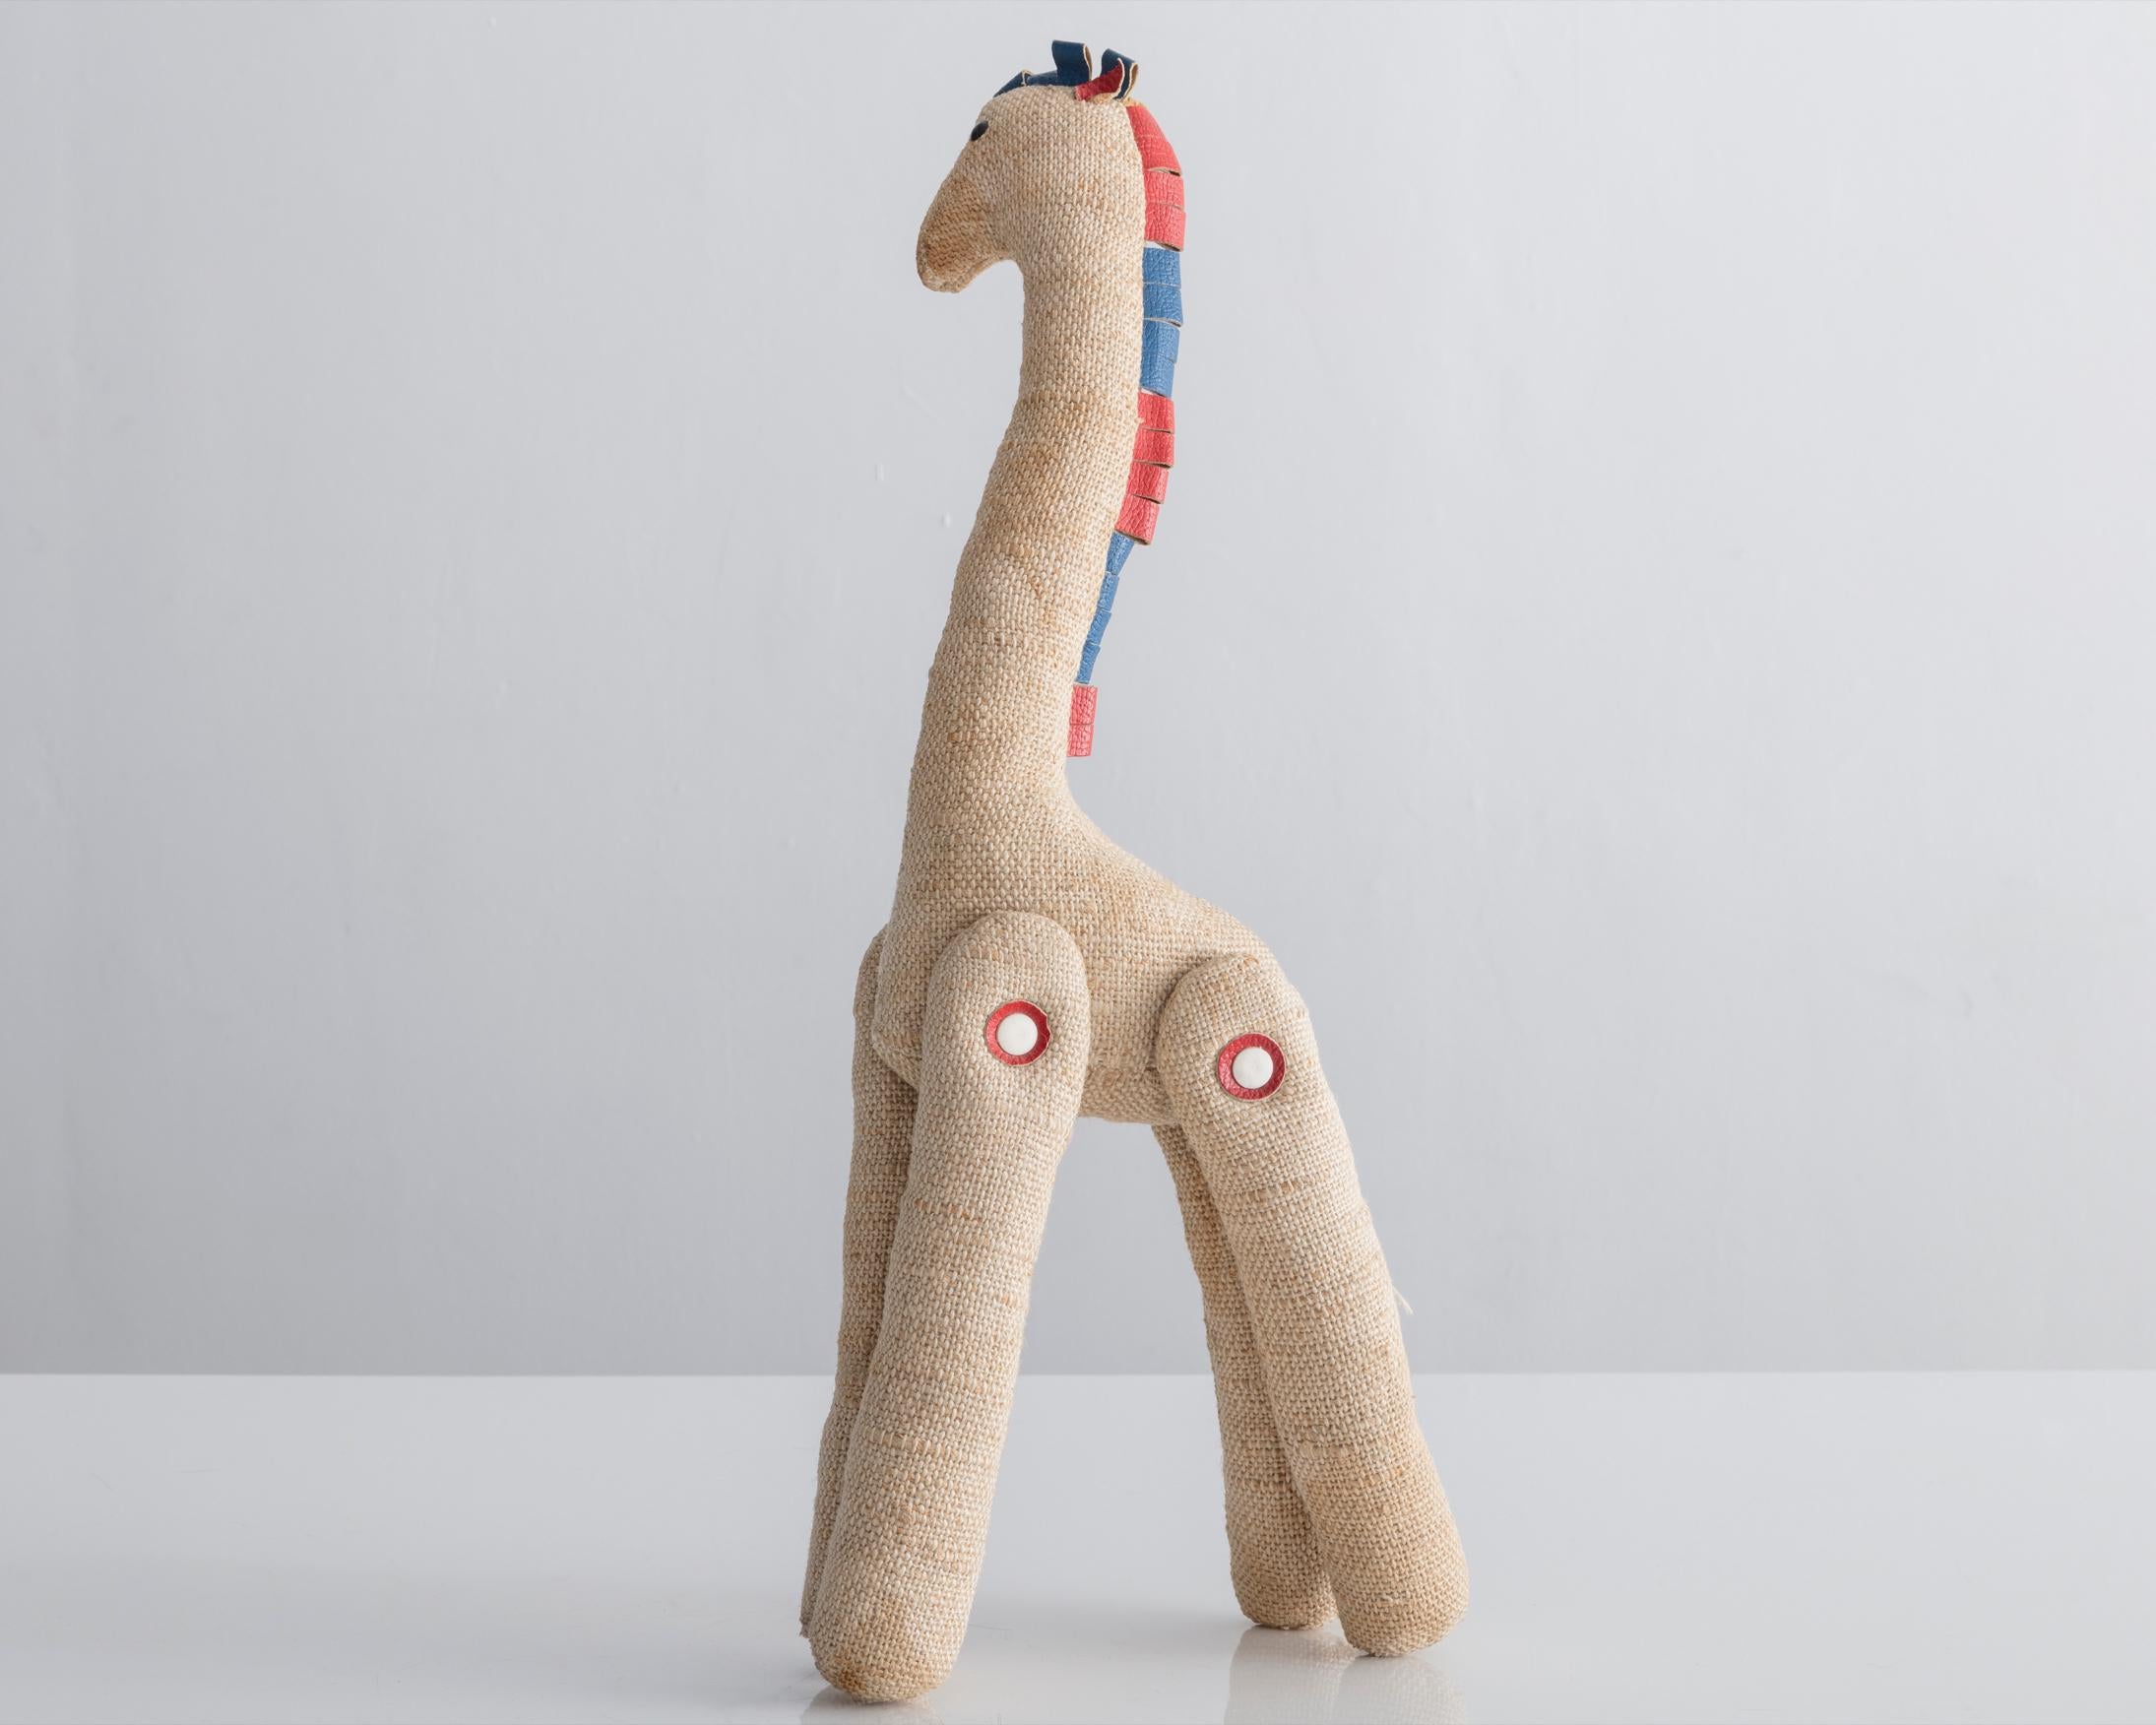 Therapeutic Toy Giraffe in natural jute with red and blue leather detailing. Designed by Renate Müller for H. Josef Leven KG, Sonneberg, Germany, circa 1968.
   